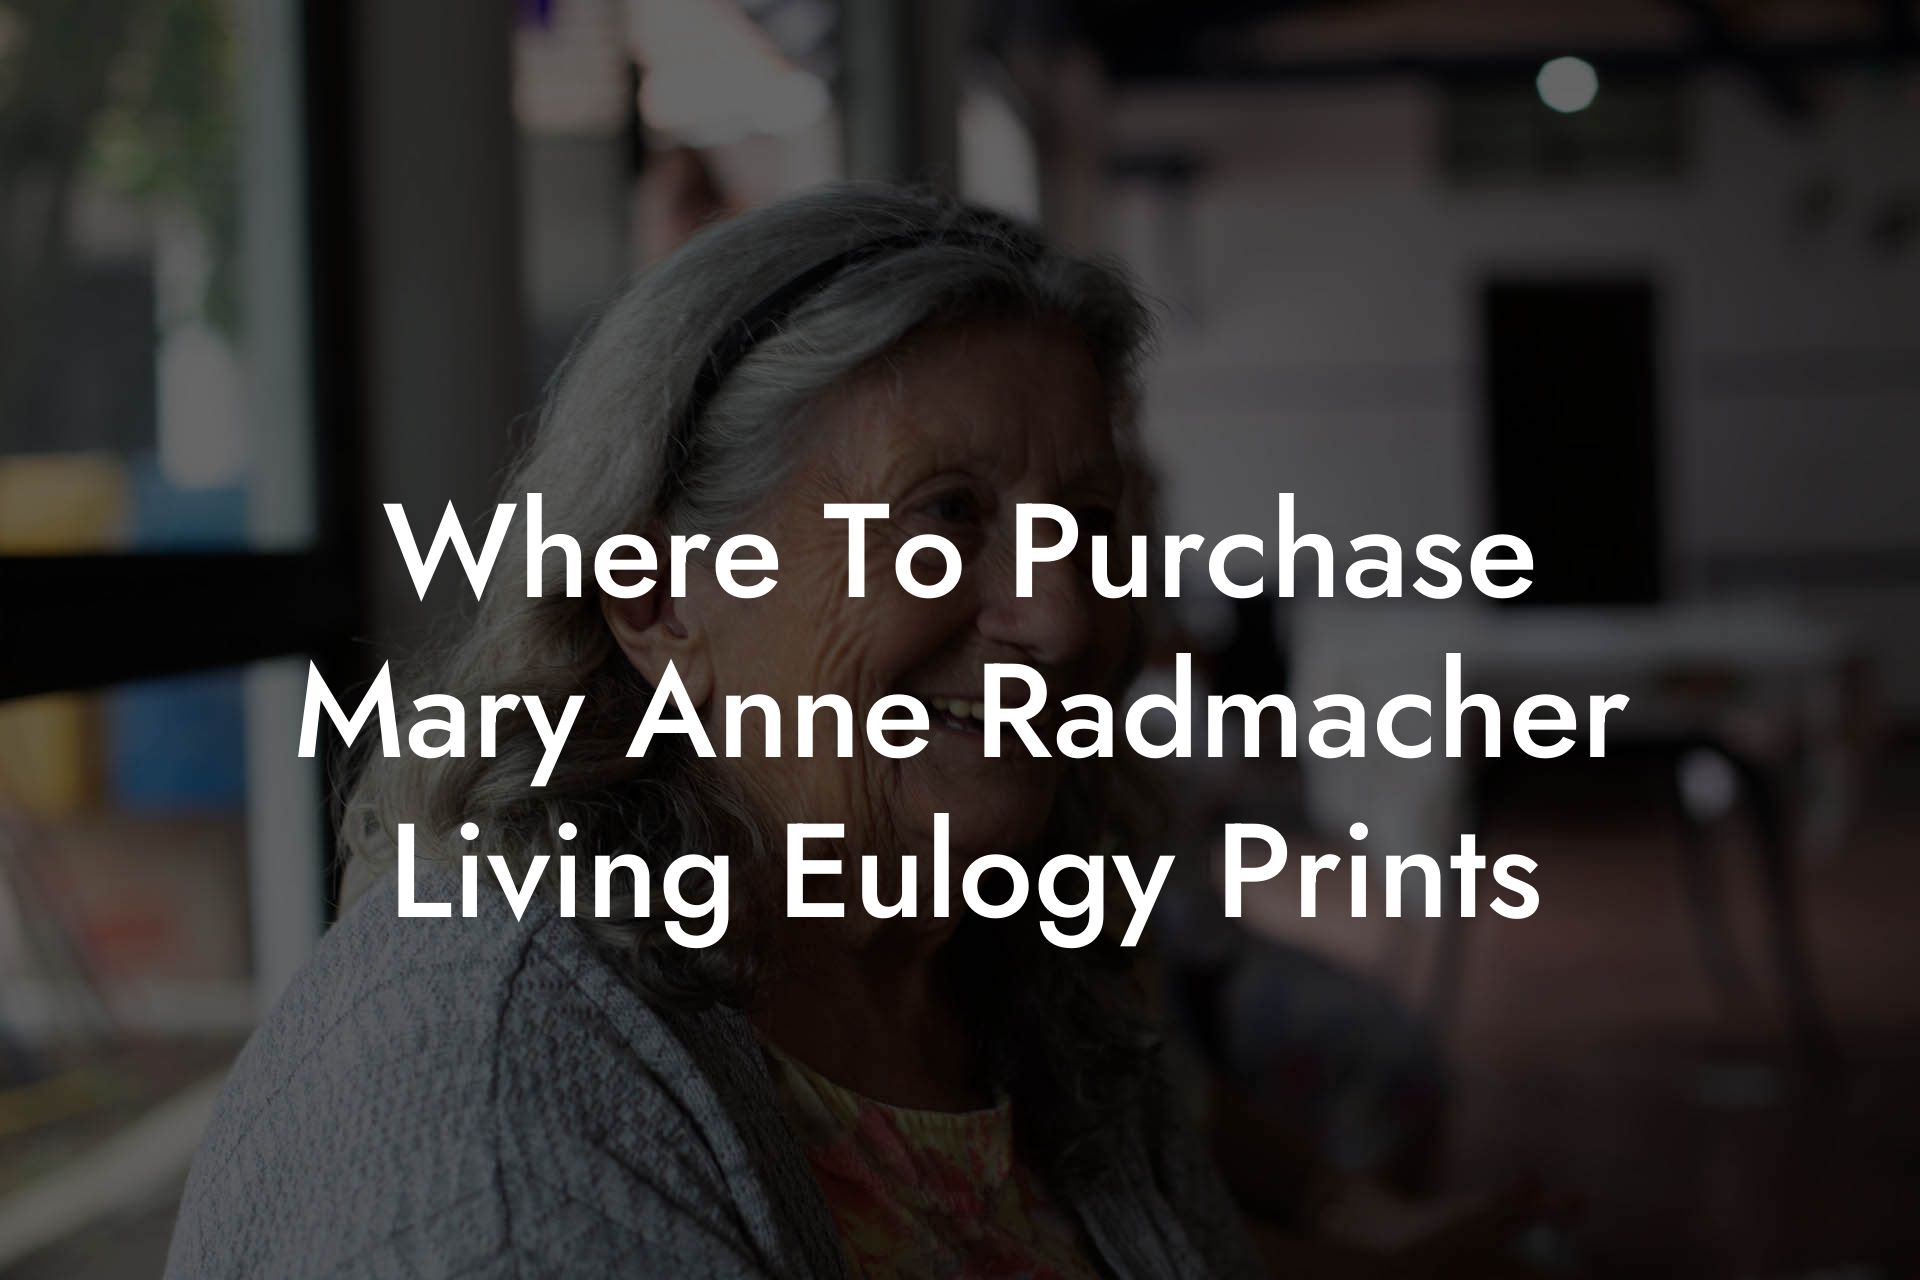 Where To Purchase Mary Anne Radmacher Living Eulogy Prints